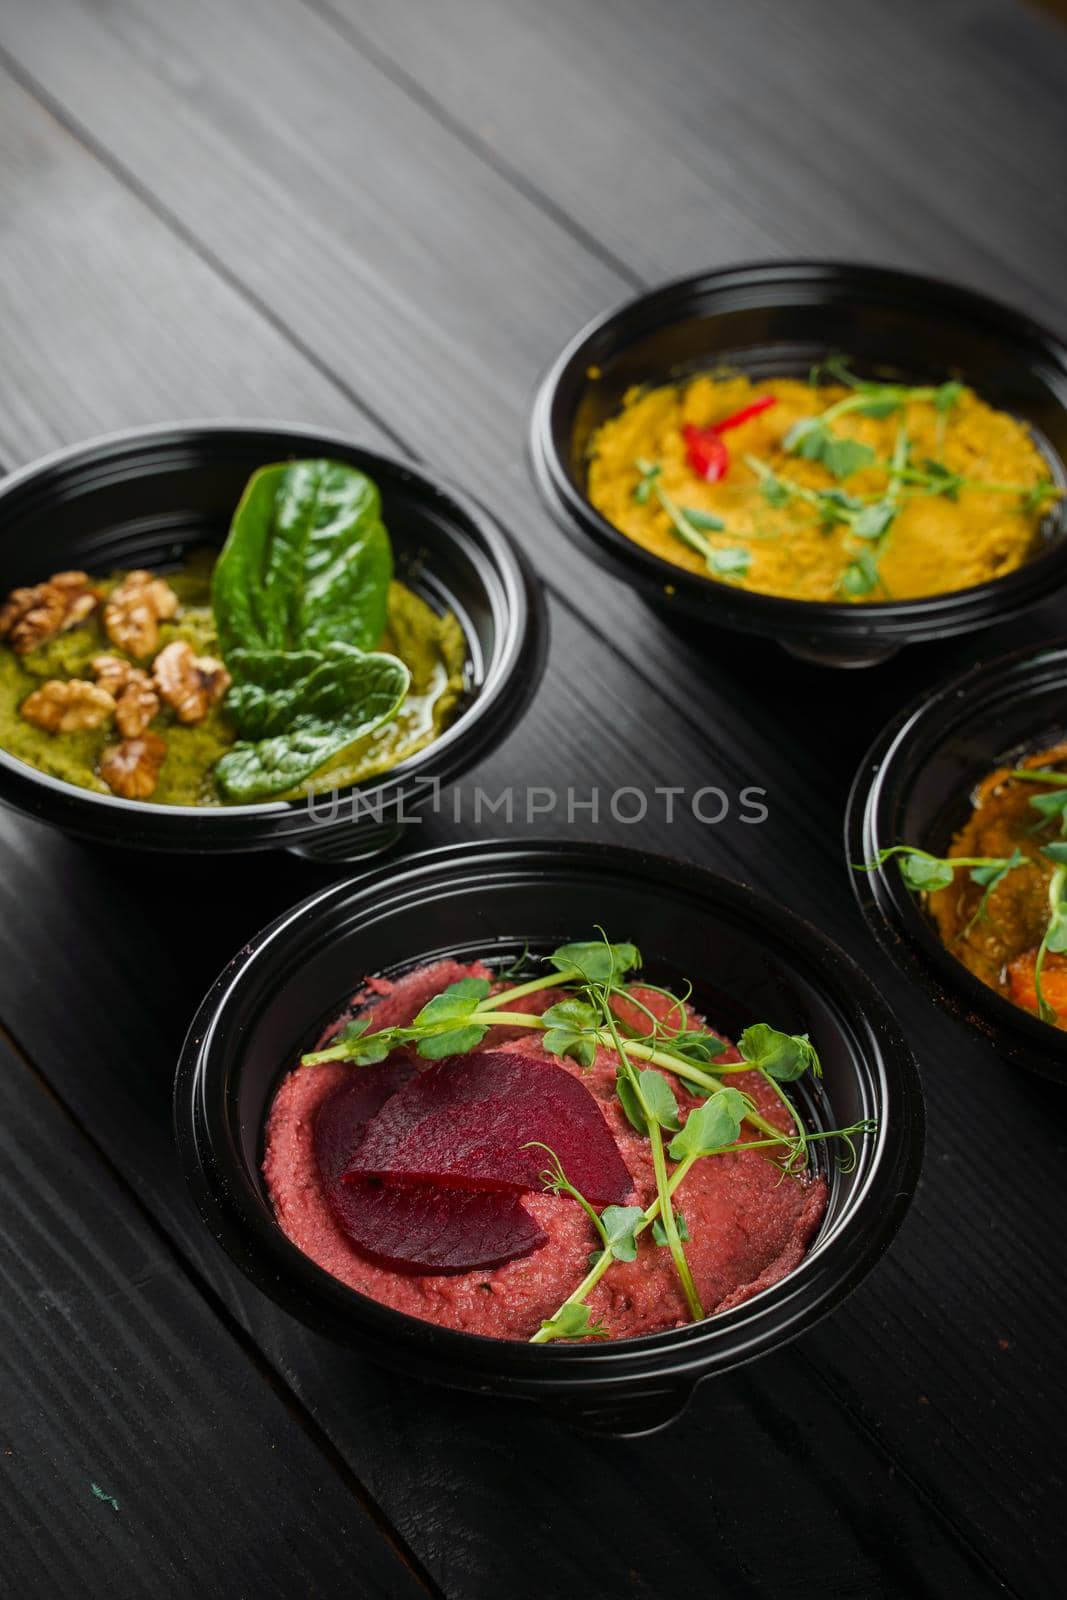 Hummus garnished peppers, chili, beet and herbs in black bowl on dark wooden table. Hummus assortment.